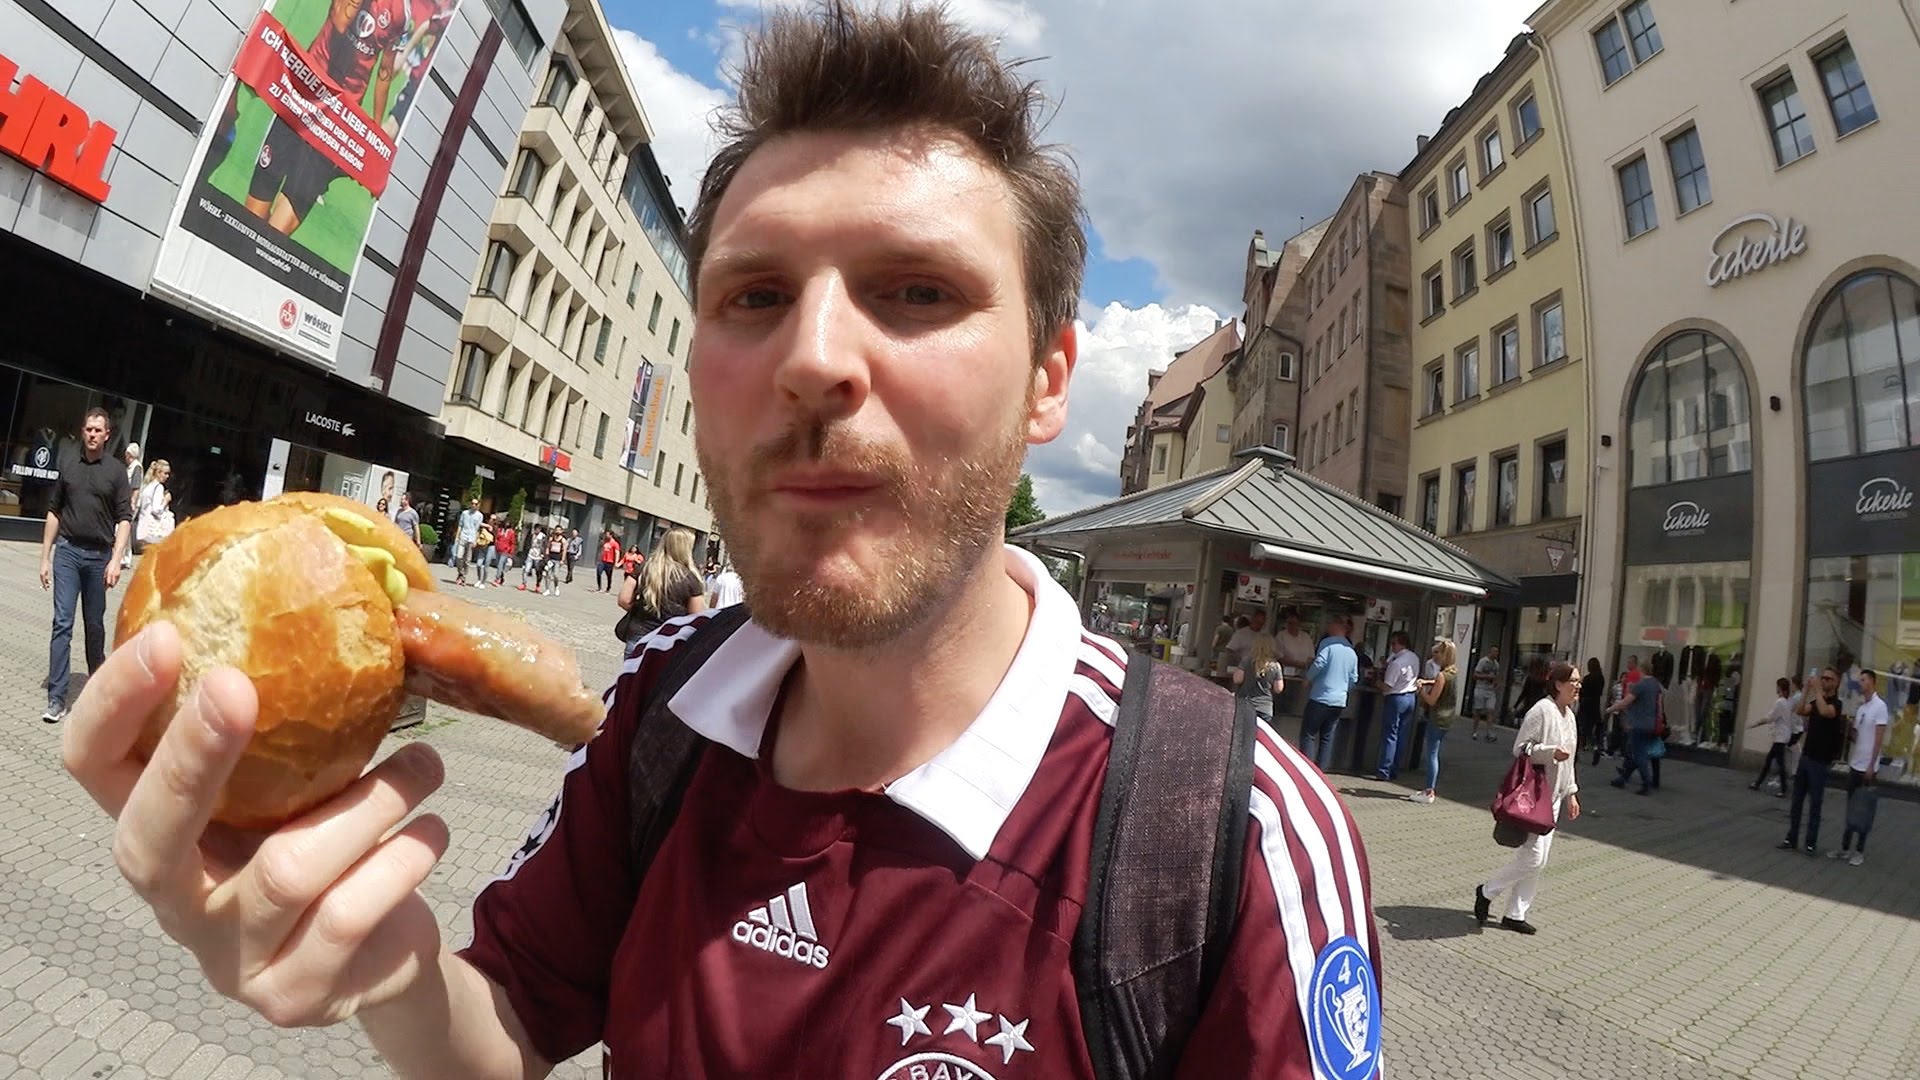 7 Things You DON'T DO IN NUREMBERG, Germany - YouTube